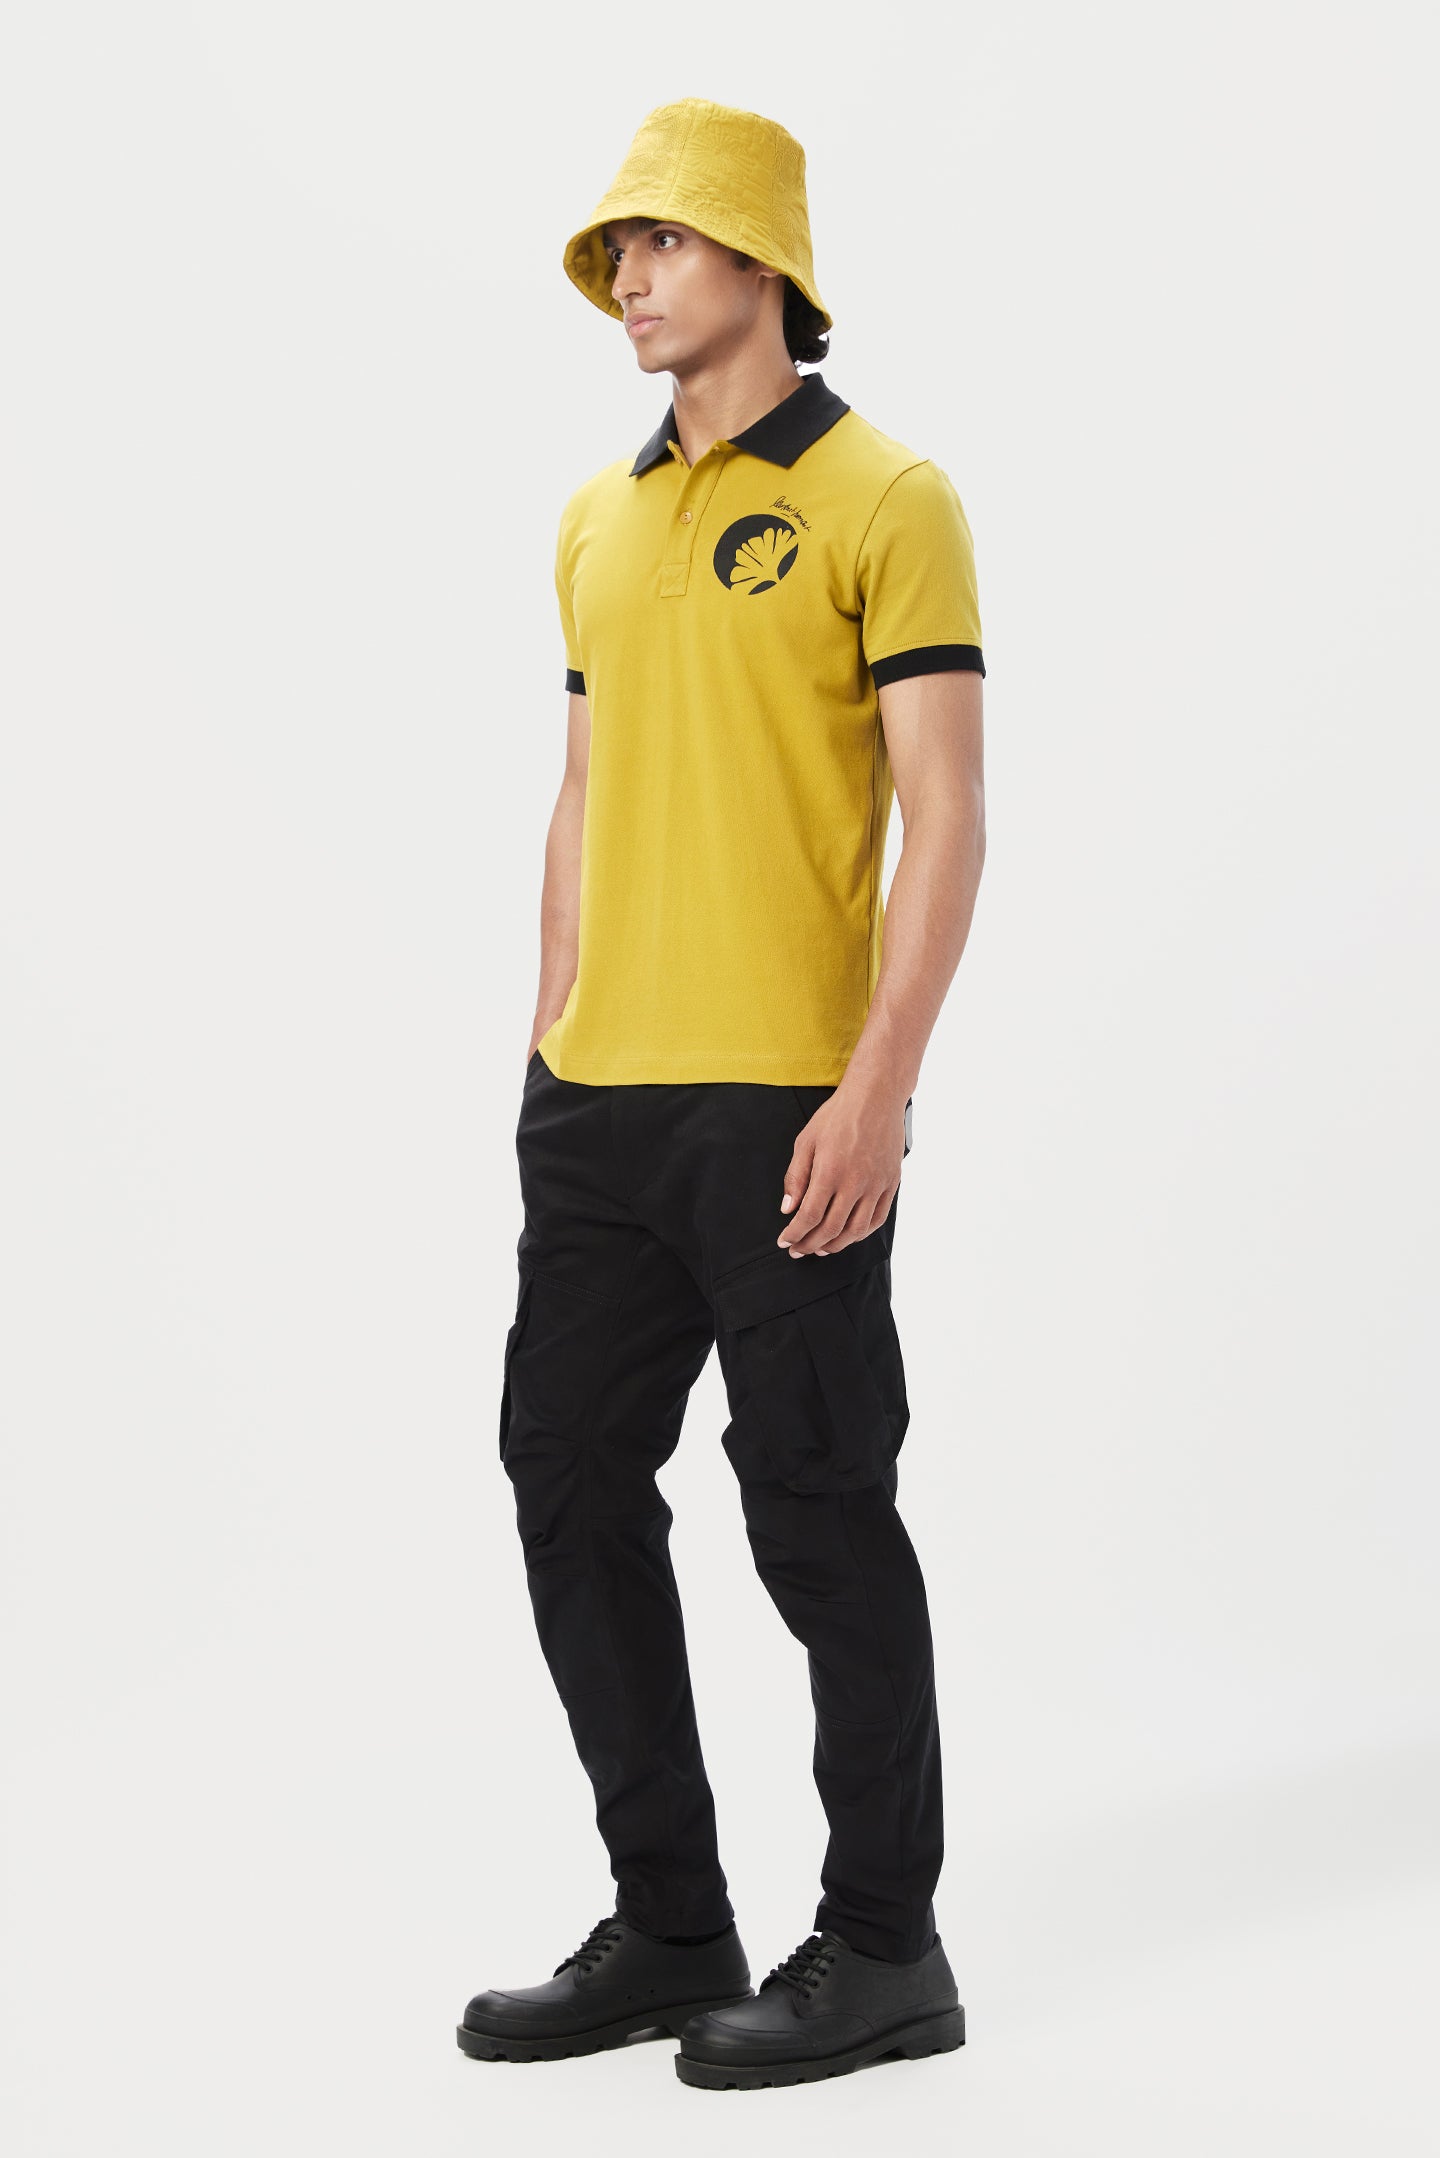 Regular Fit Polo T-Shirt with Signature Stamp Print Placement